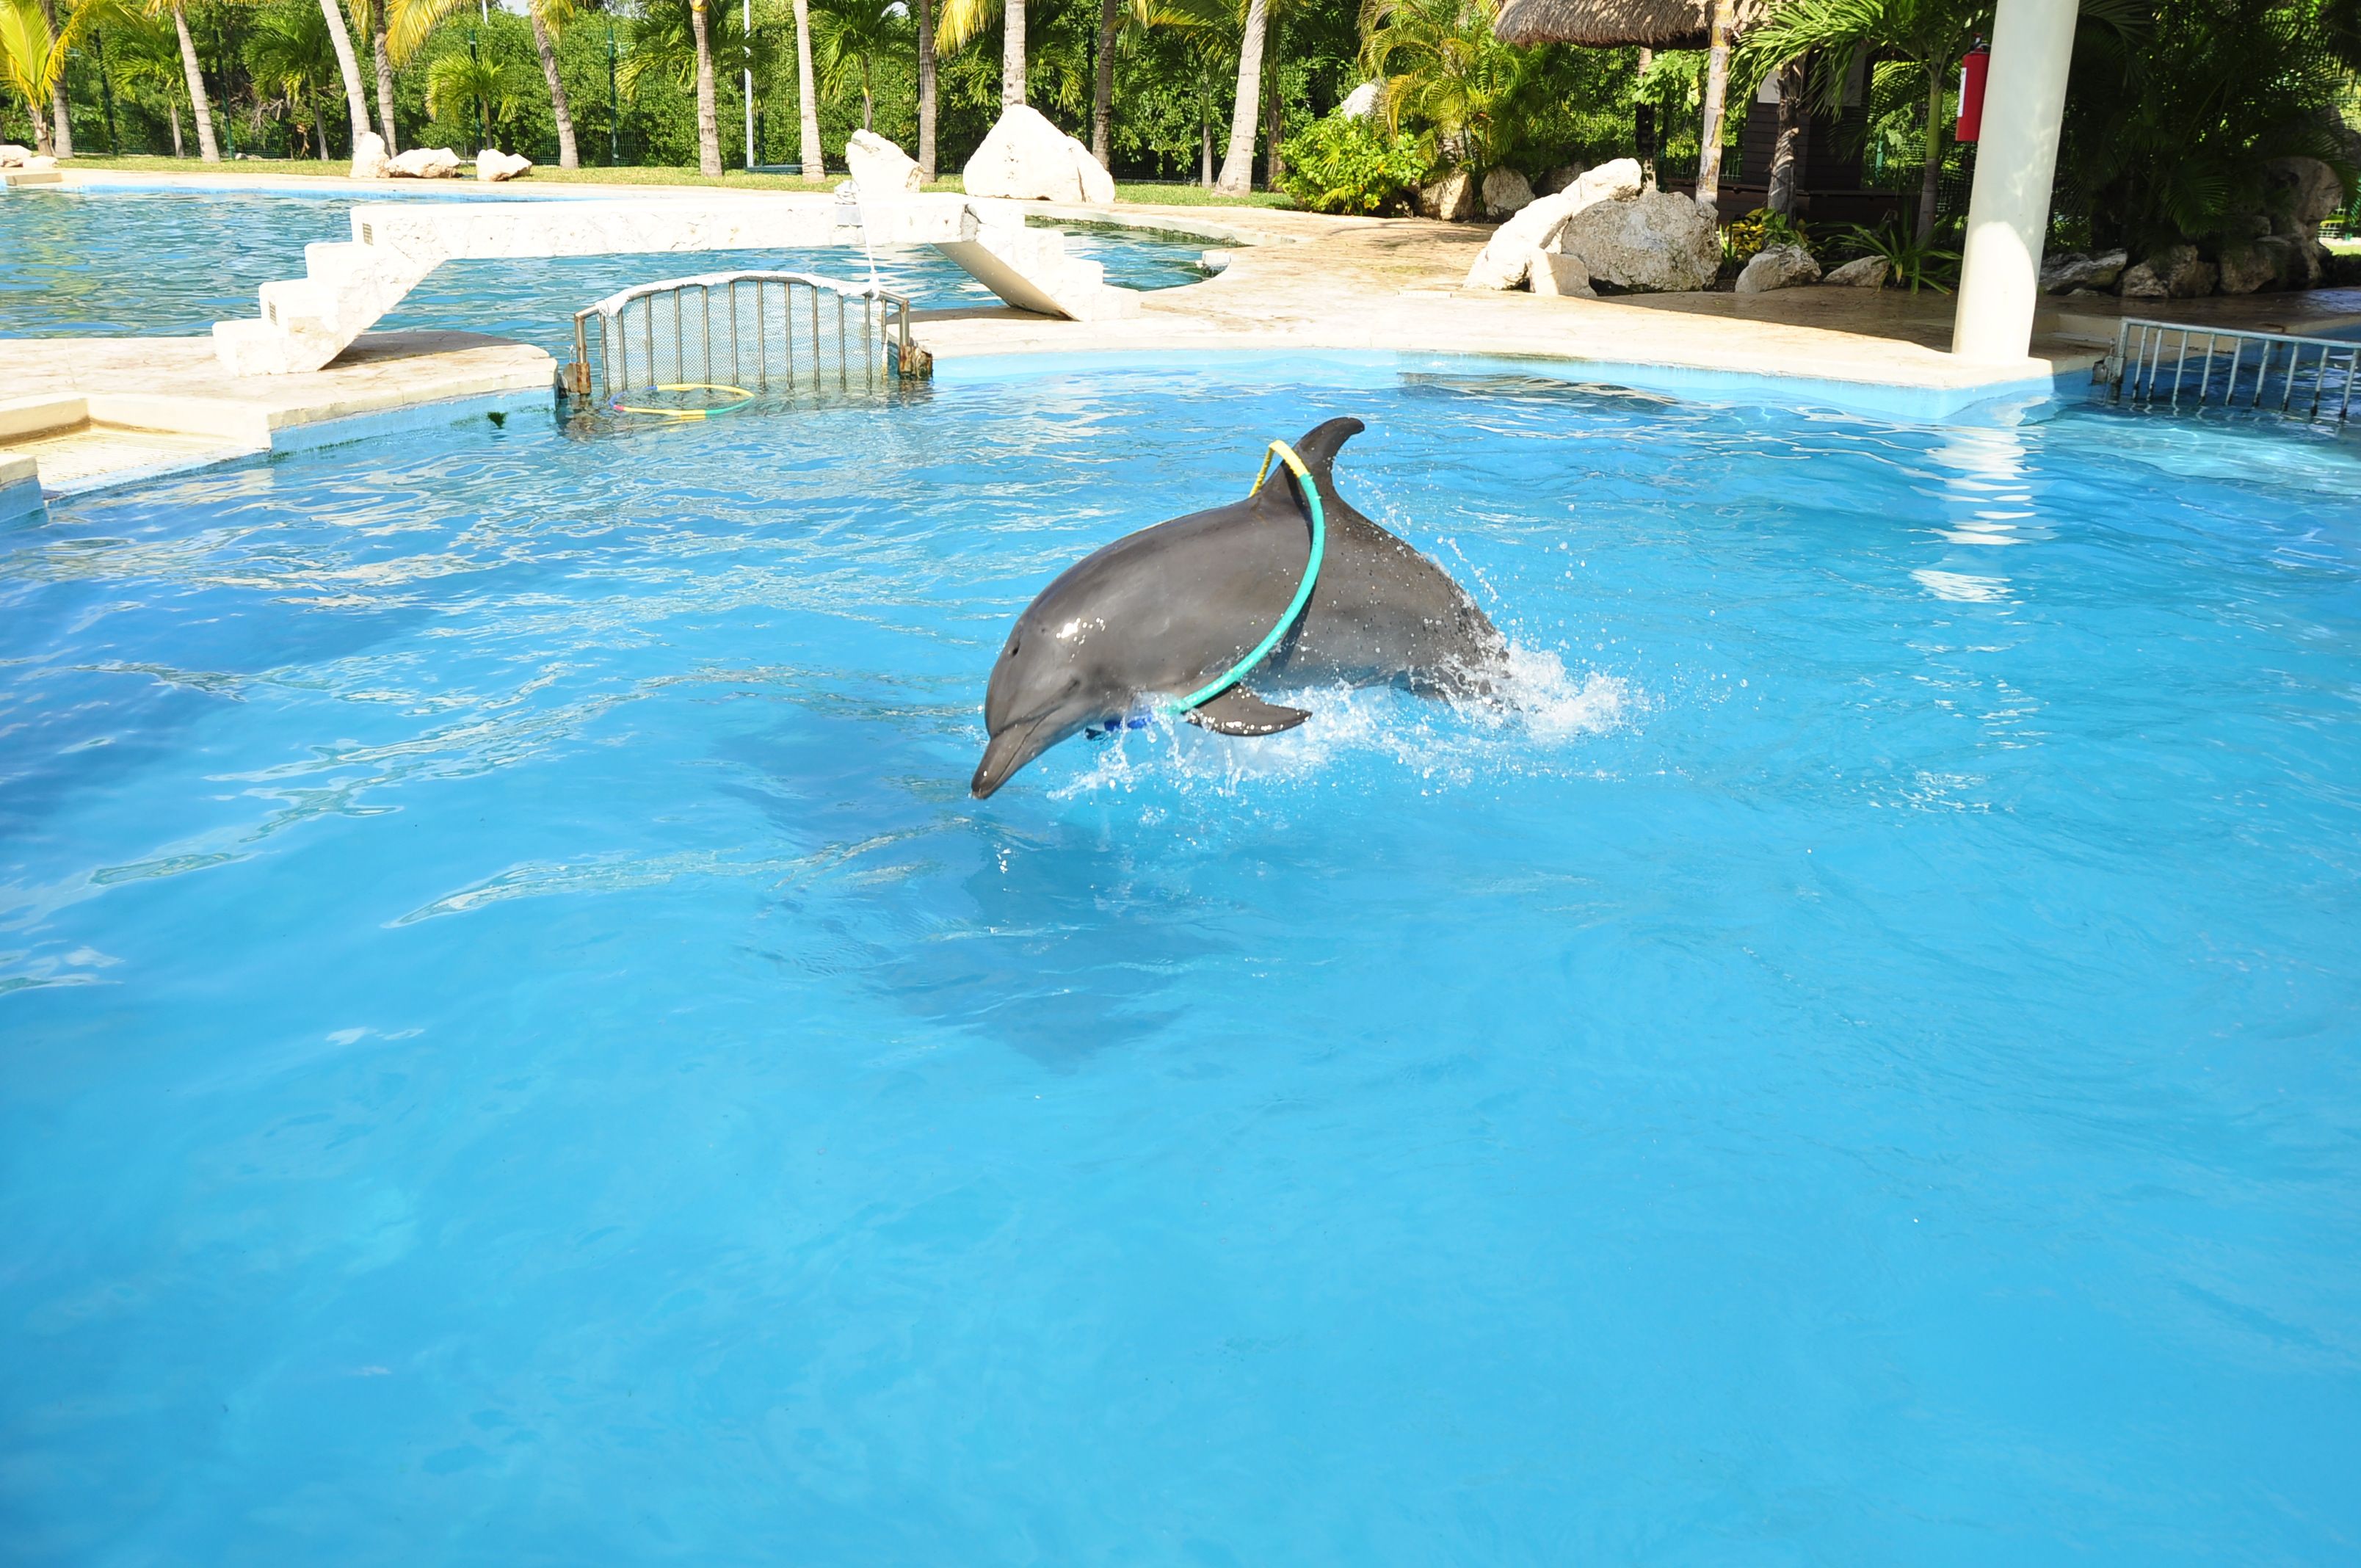 dolphin having fun | Dolphins Playing | Pinterest